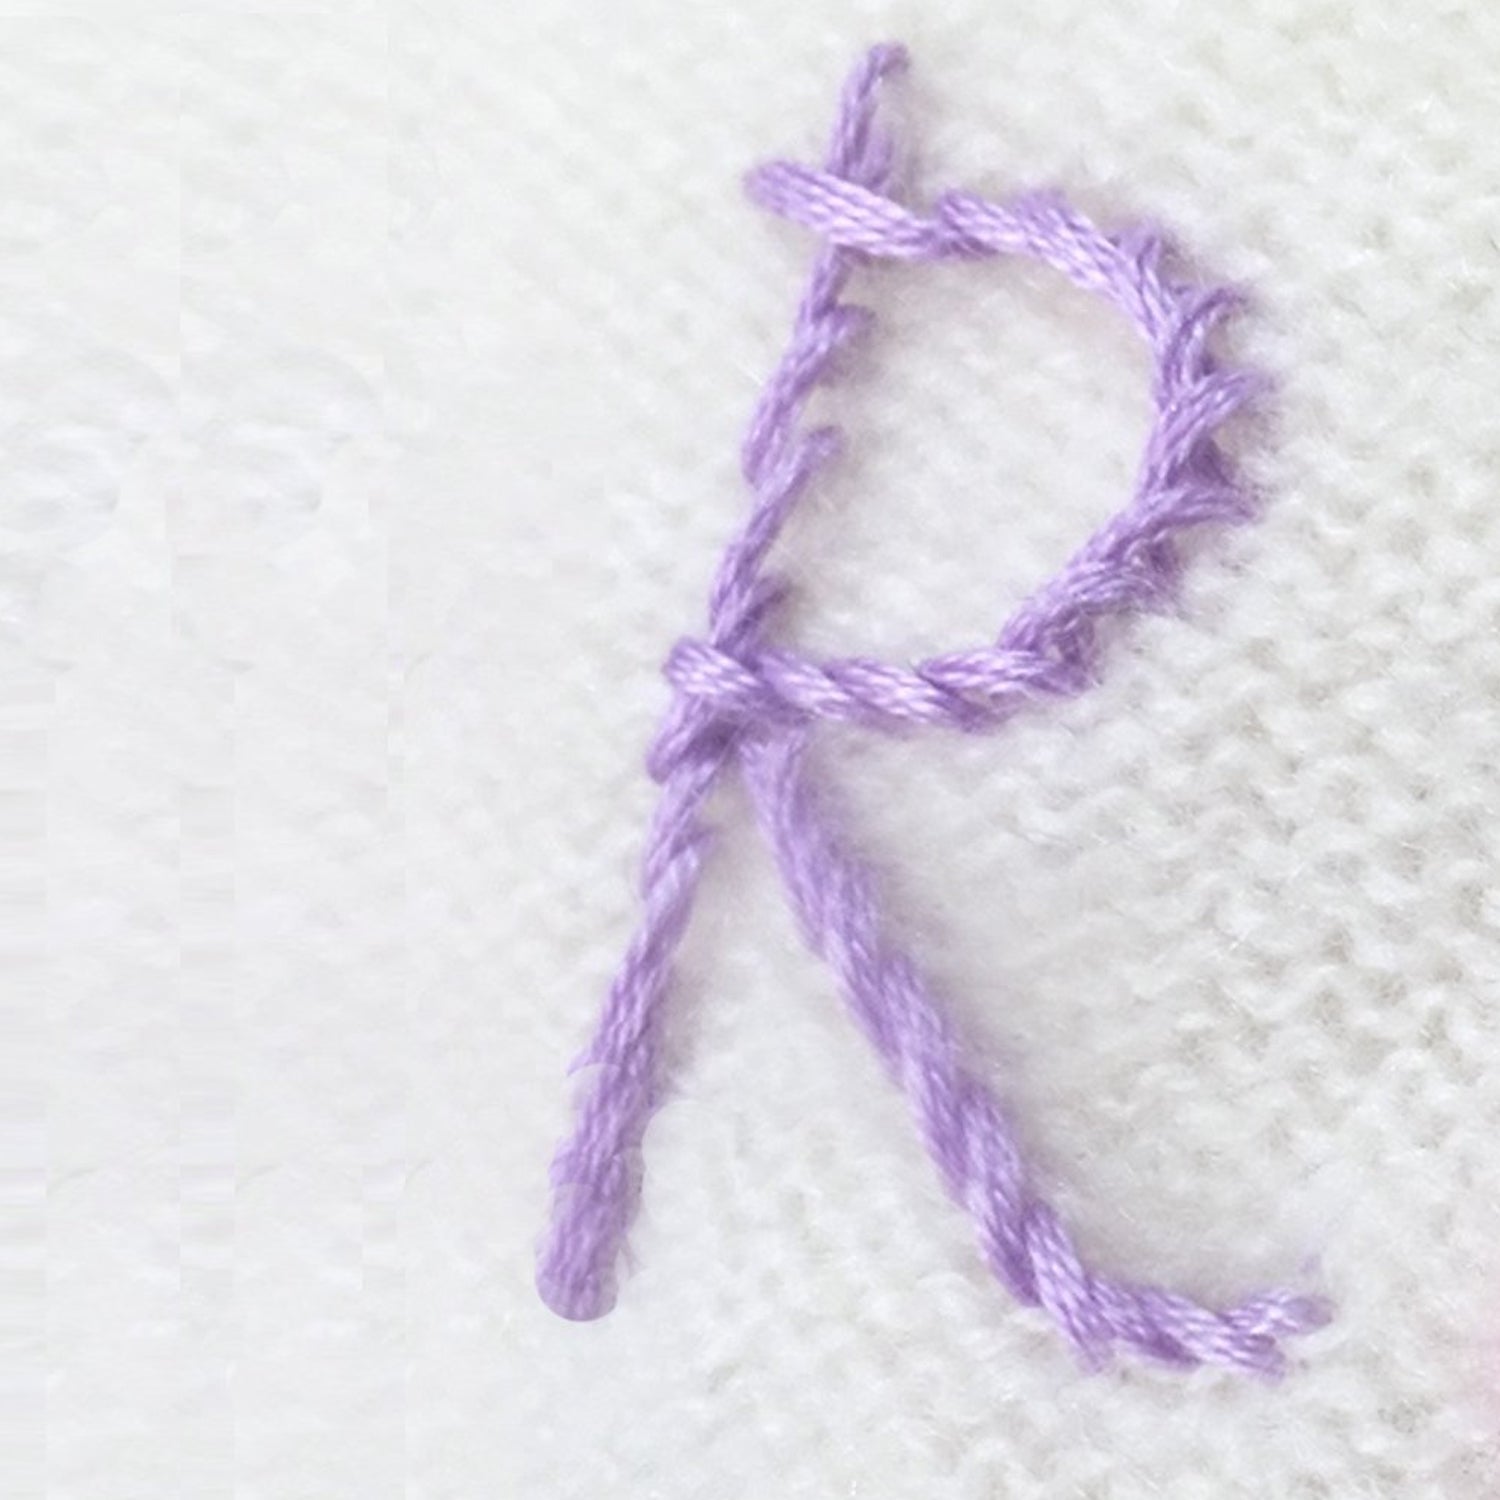 embroidered letter